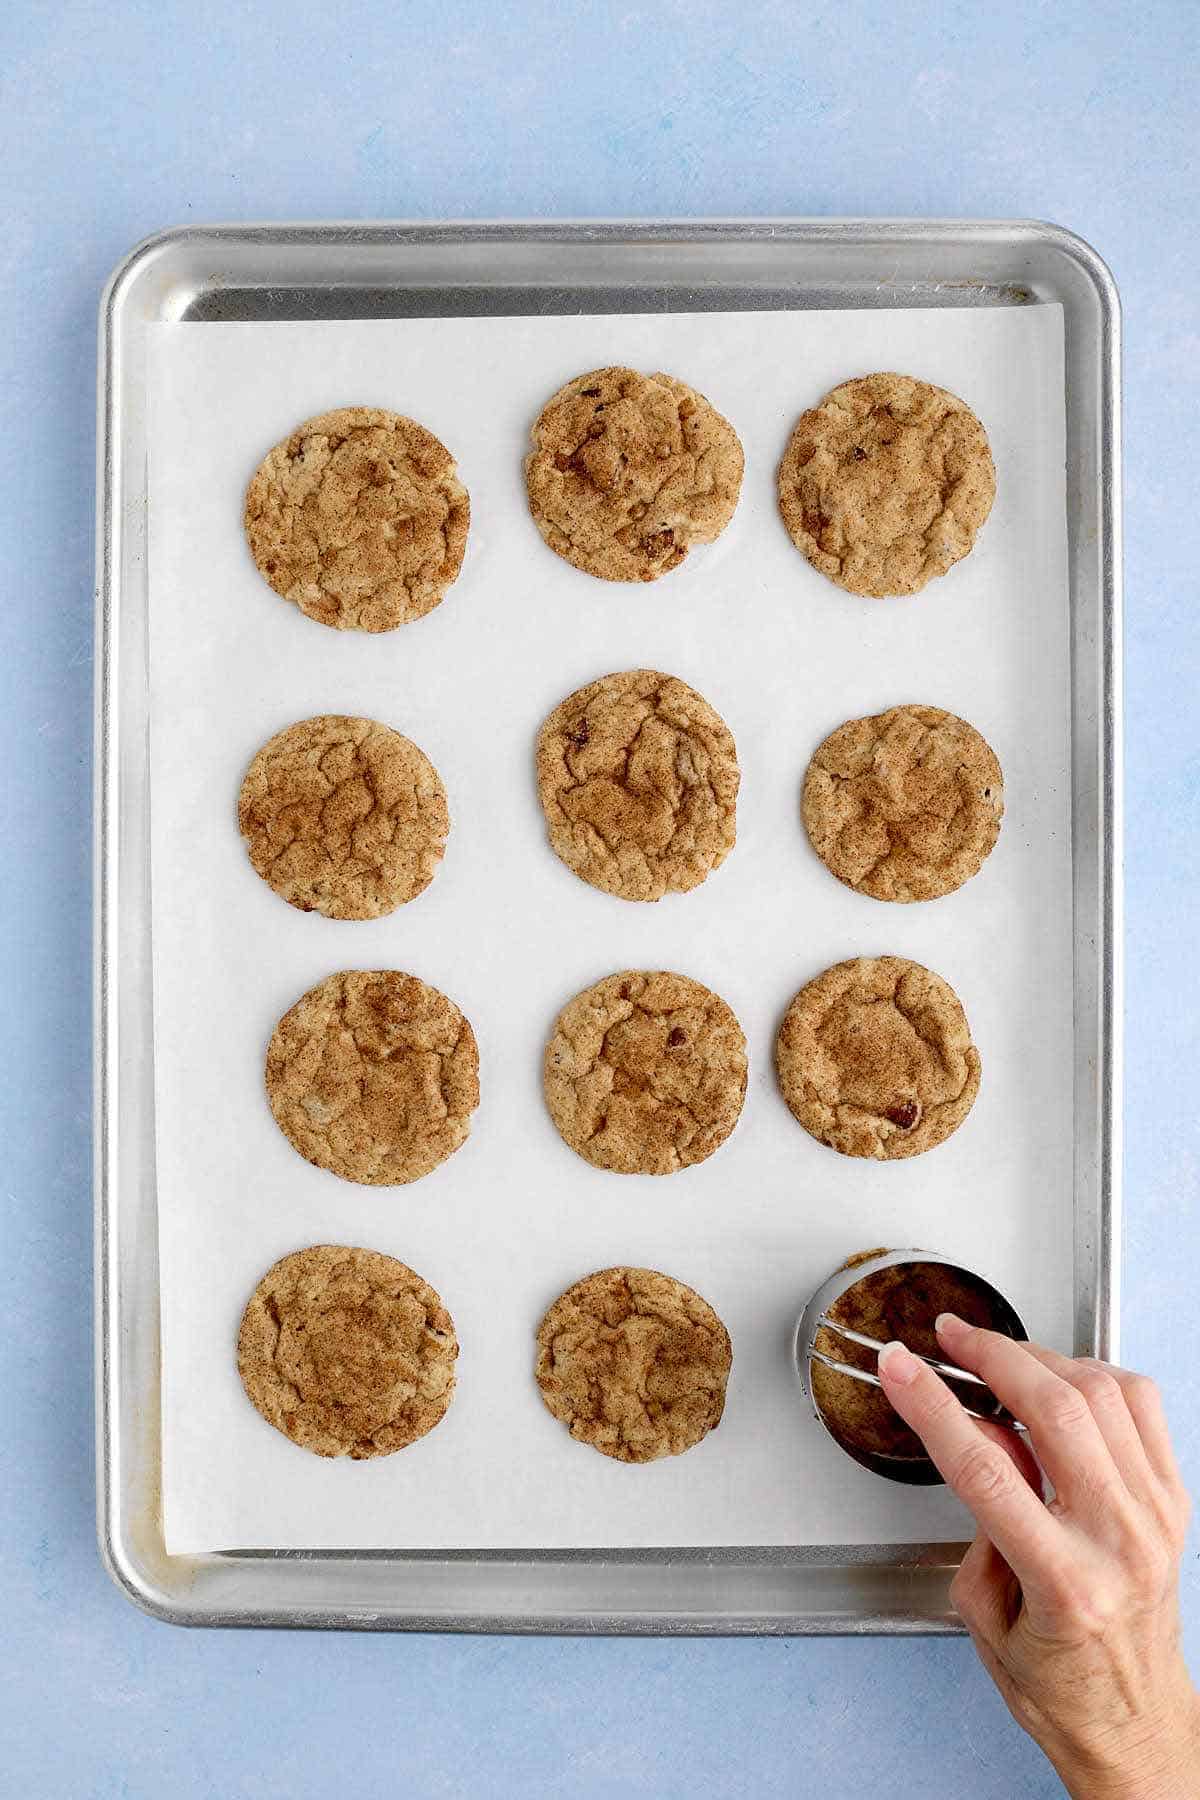 Shaping the baked cookies with a cookie ring.